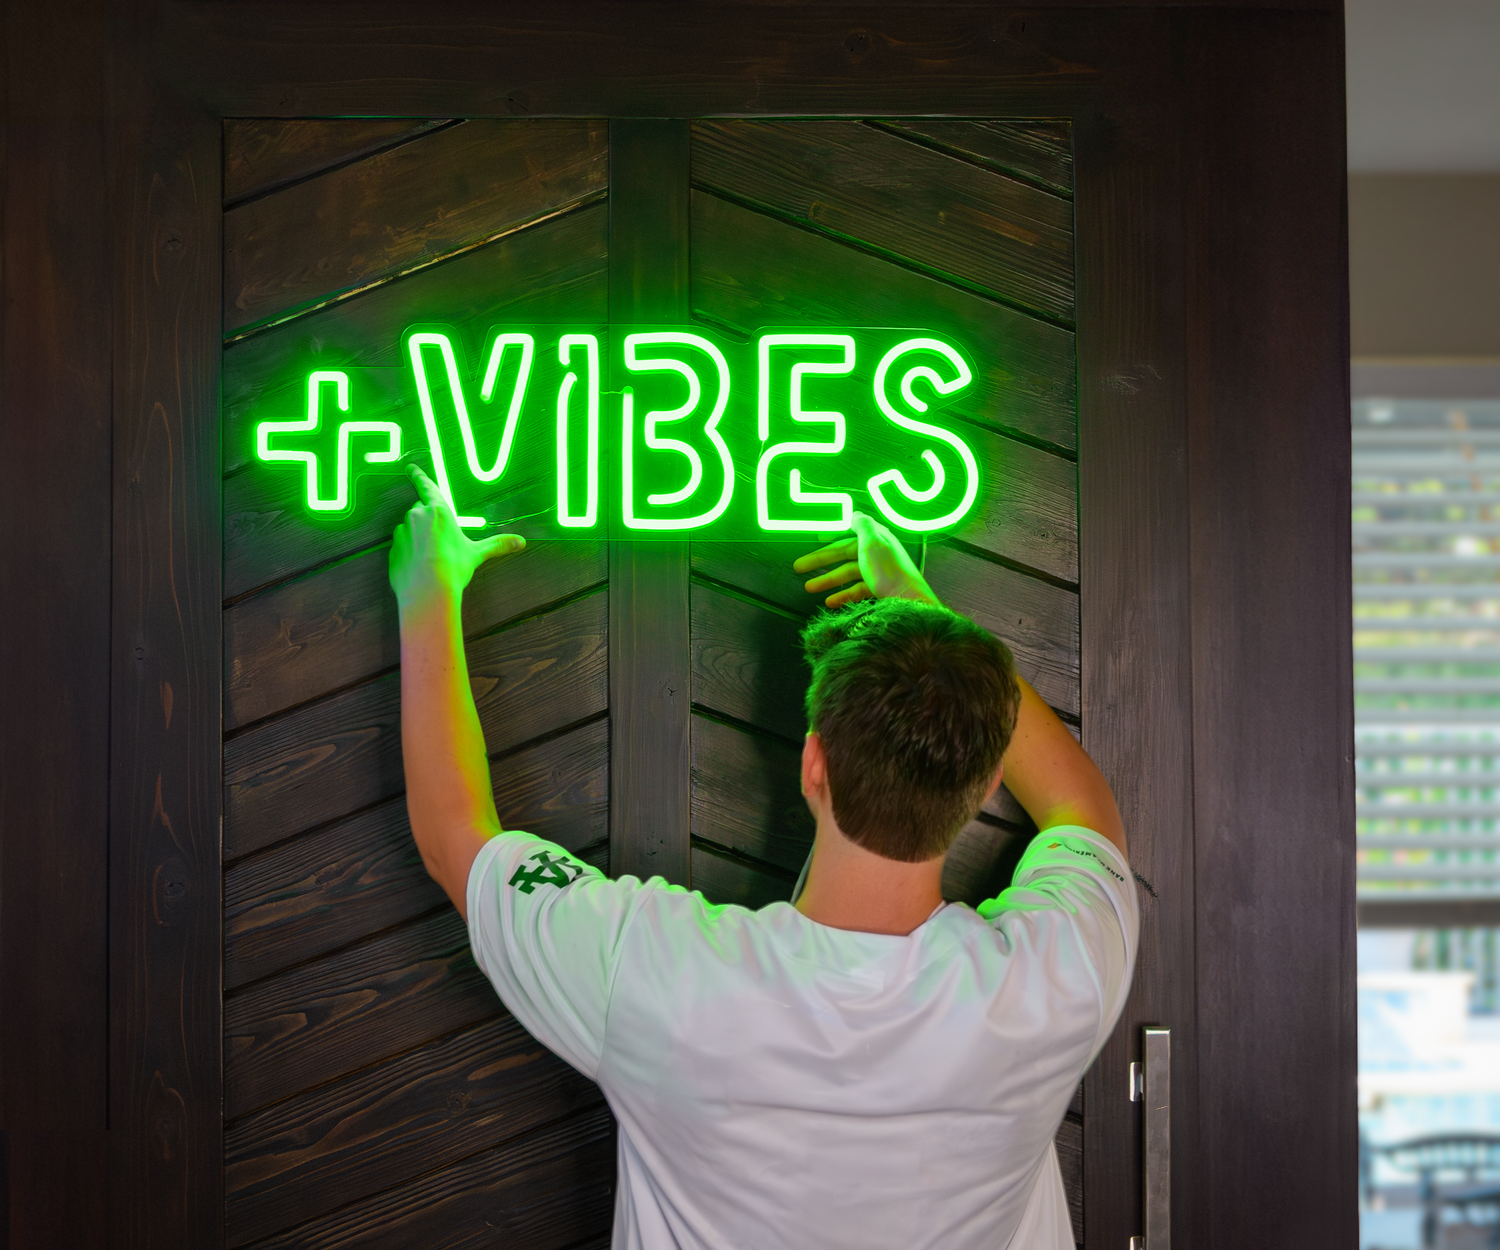 a man holding a green neon sign that says "positive vibes"